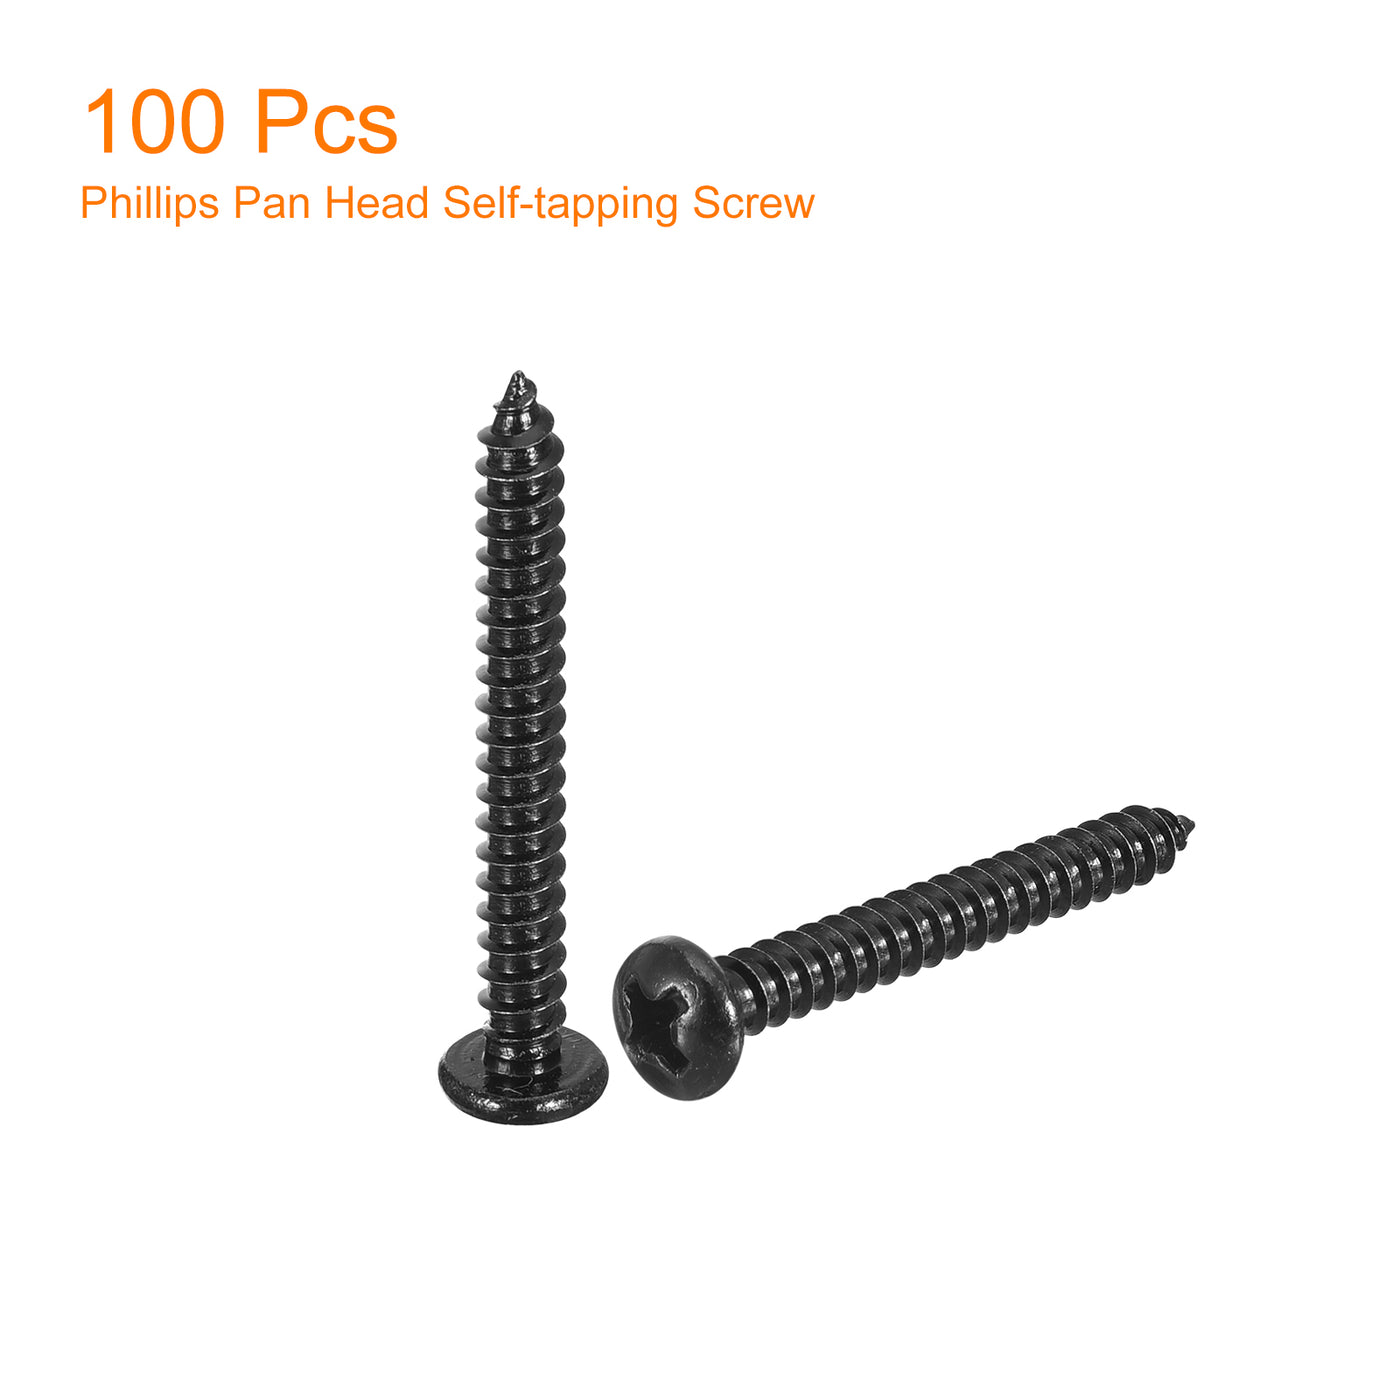 uxcell Uxcell #6 x 1-3/16" Phillips Pan Head Self-tapping Screw, 100pcs - 304 Stainless Steel Round Head Wood Screw Full Thread (Black)